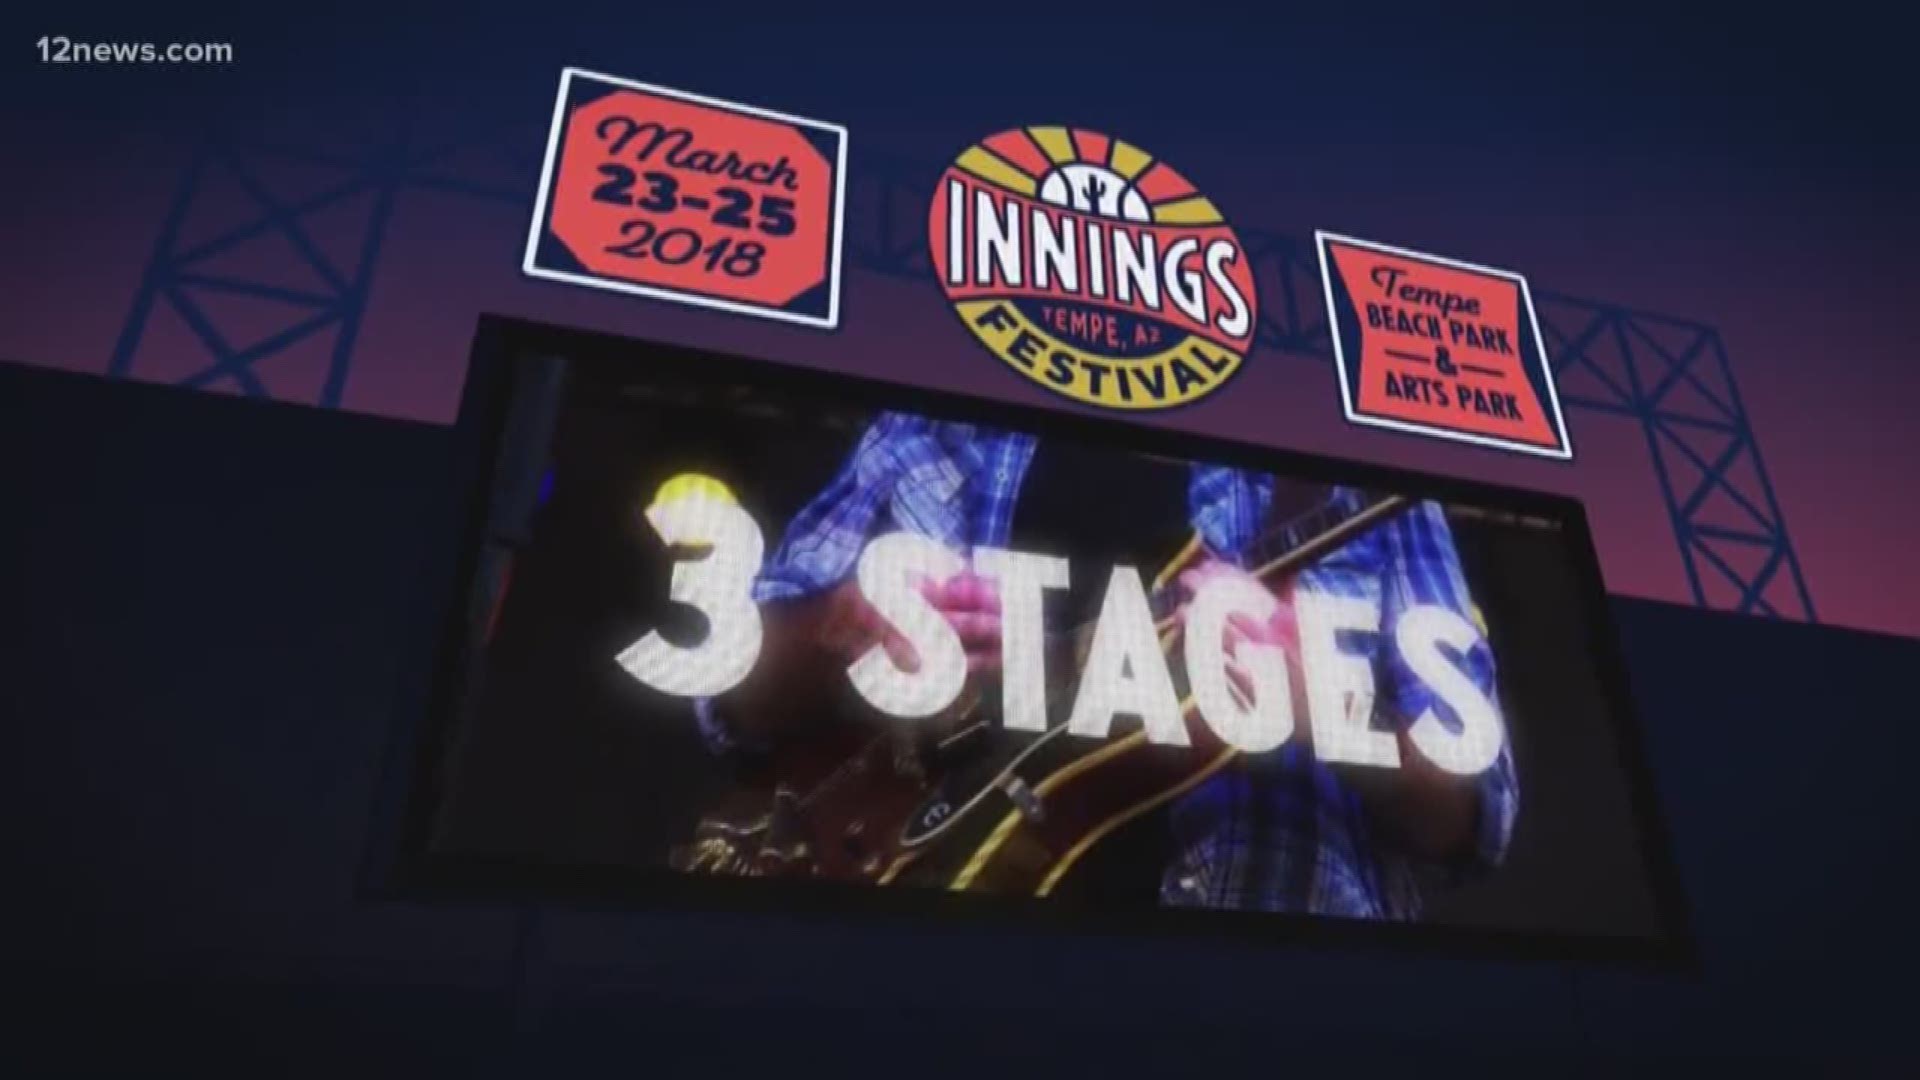 Innings Festival coming to Tempe Beach Park in May and the lineup will be announced at 10 p.m. and tickets available at noon online at www.inningsfestival.com